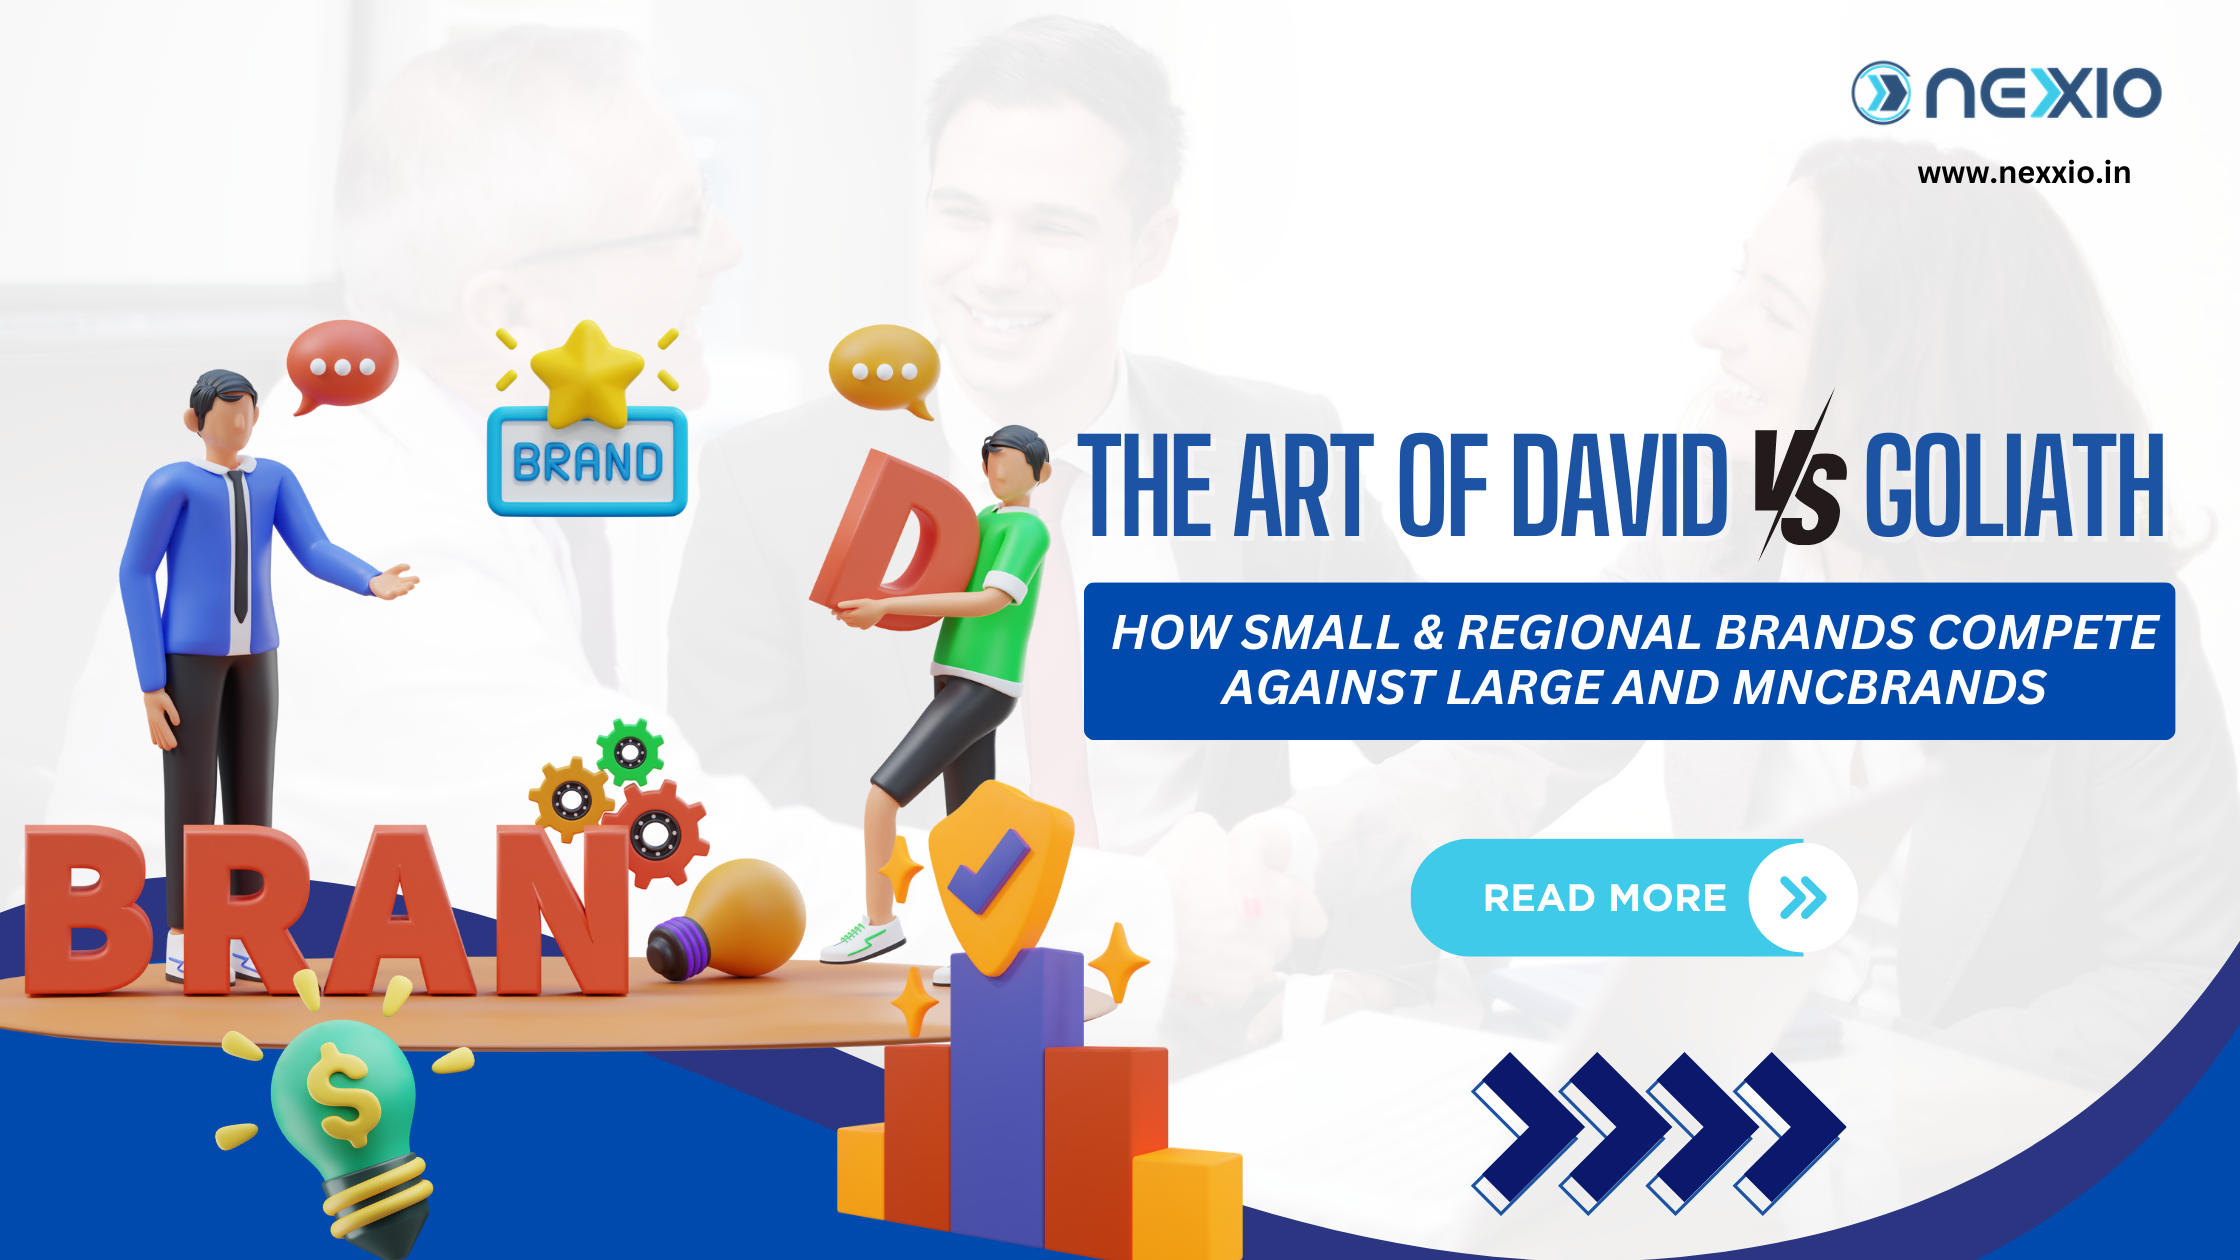 The Art of David vs. Goliath: How Small & Regional Brands Compete Against Large and MNC Brands